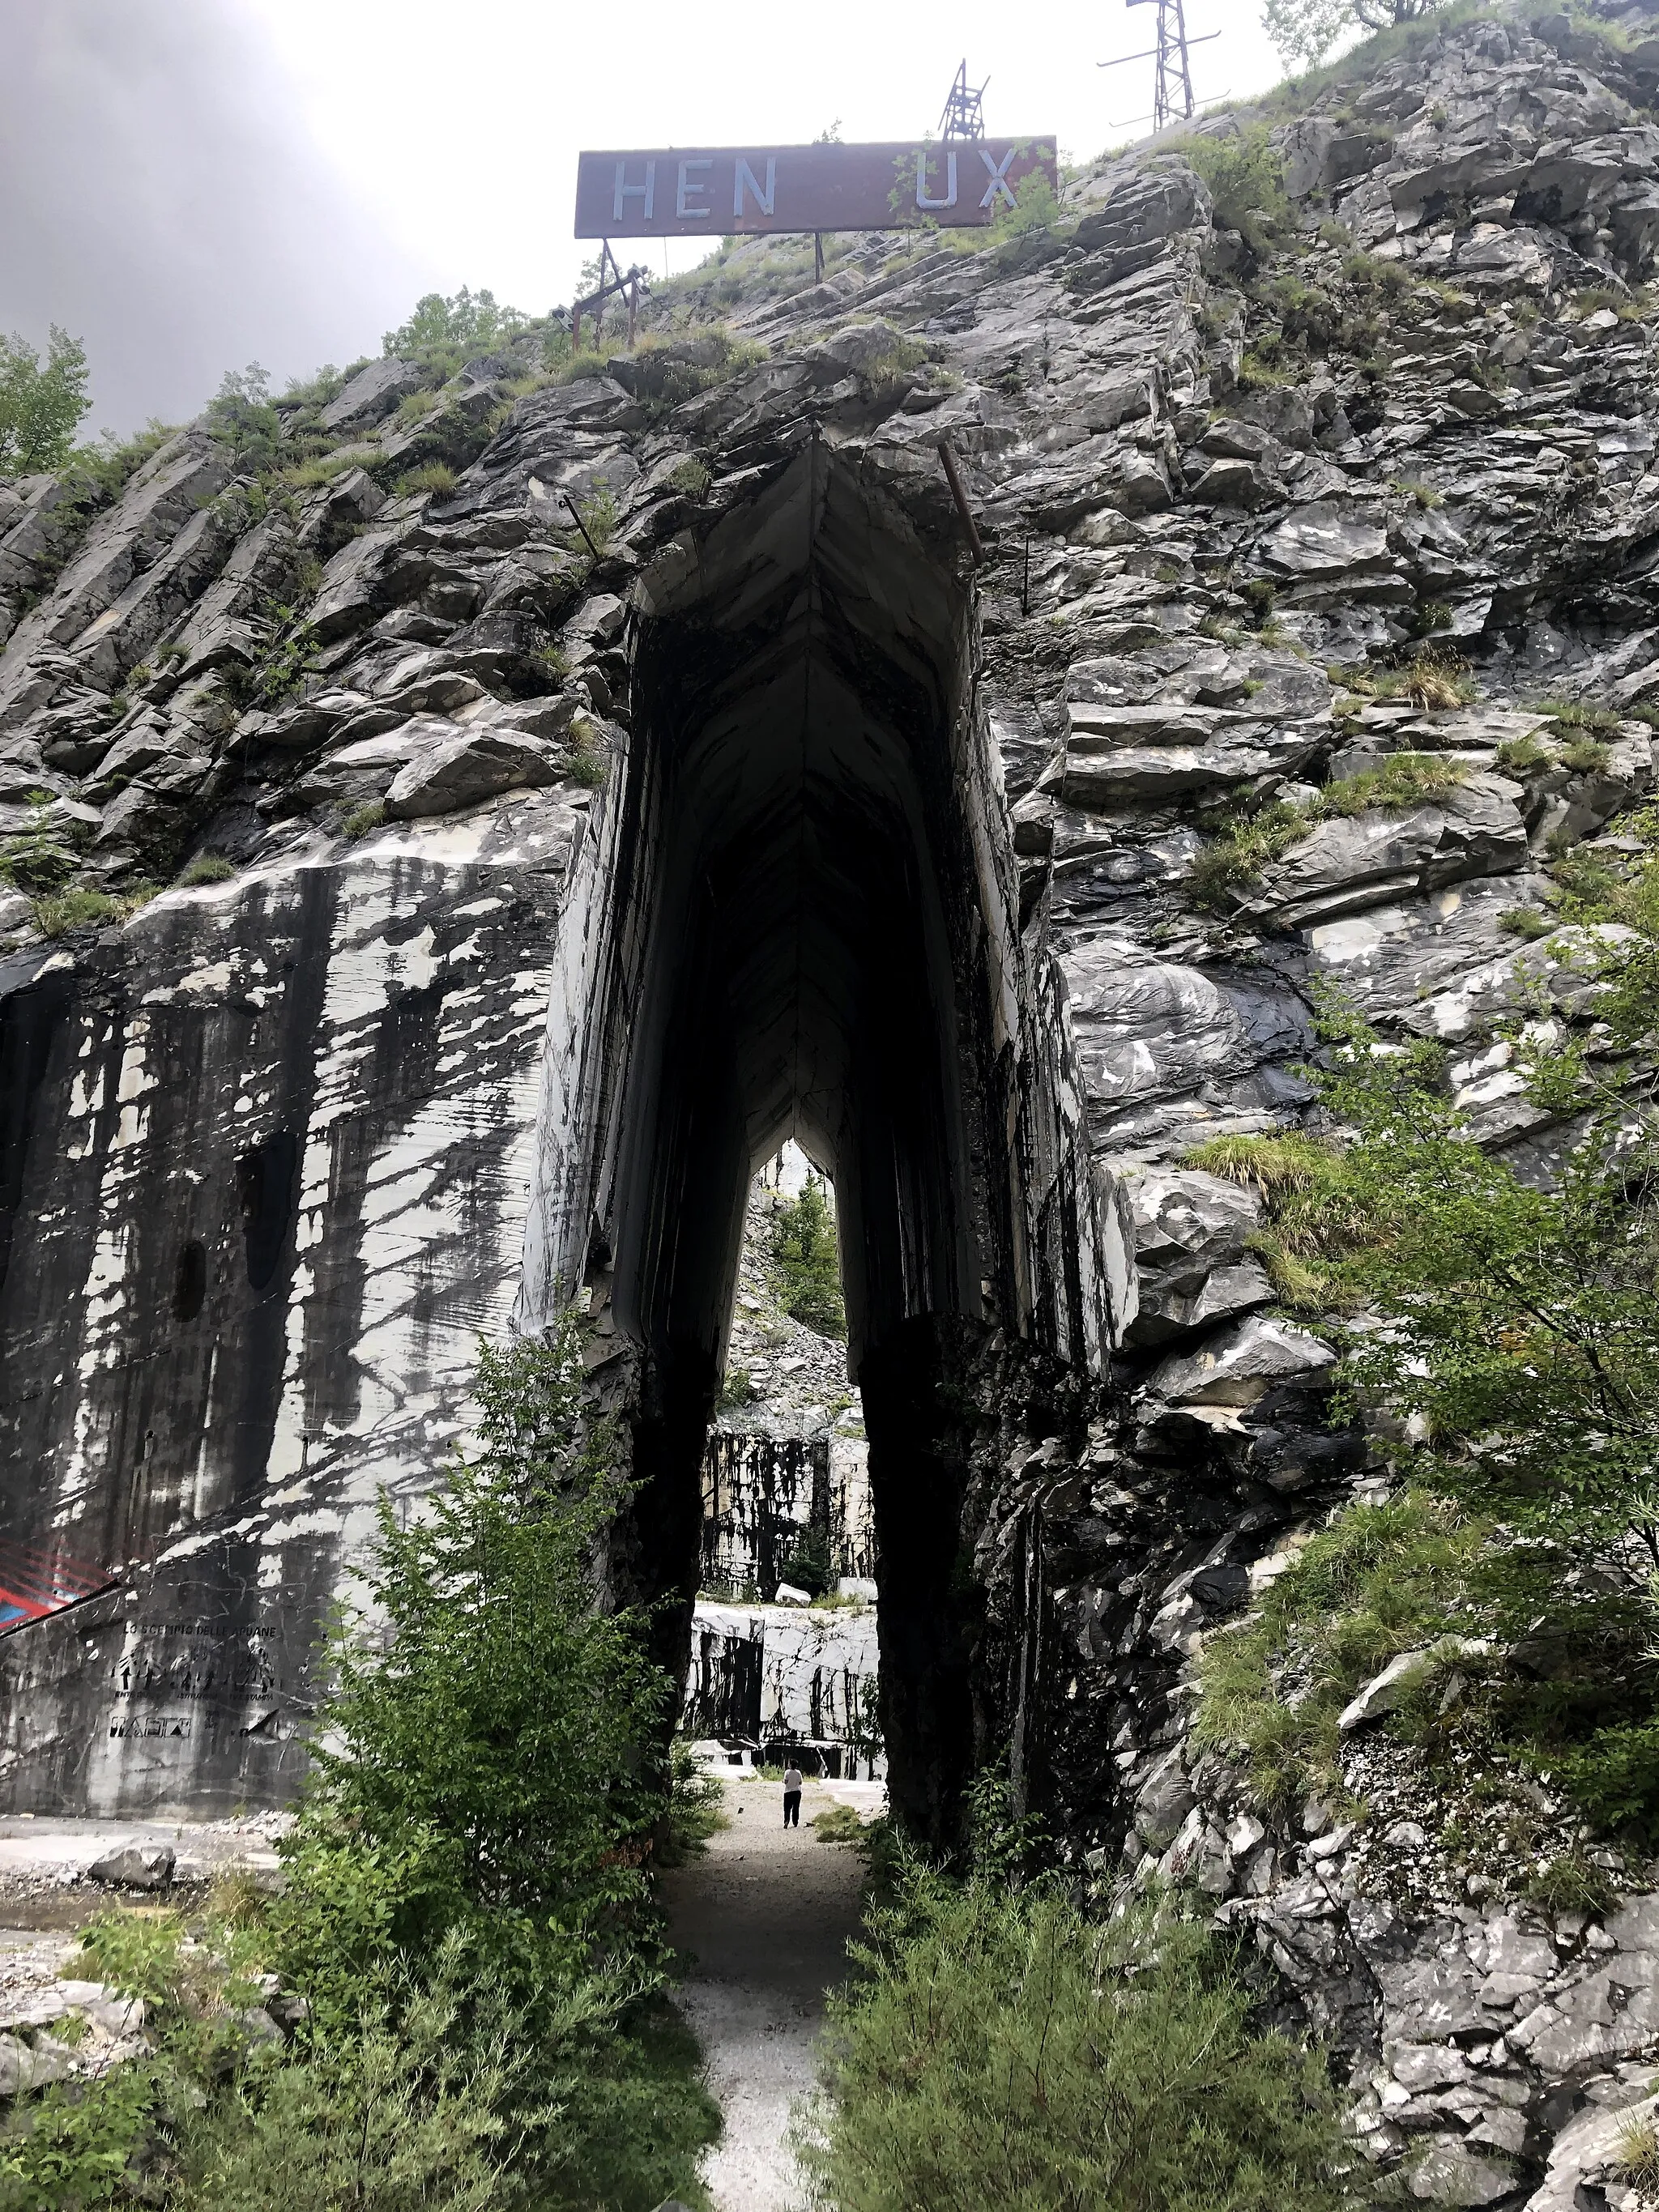 Photo showing: Entrance to abandoned Henraux marble quarry, located in Retignano, Italy.